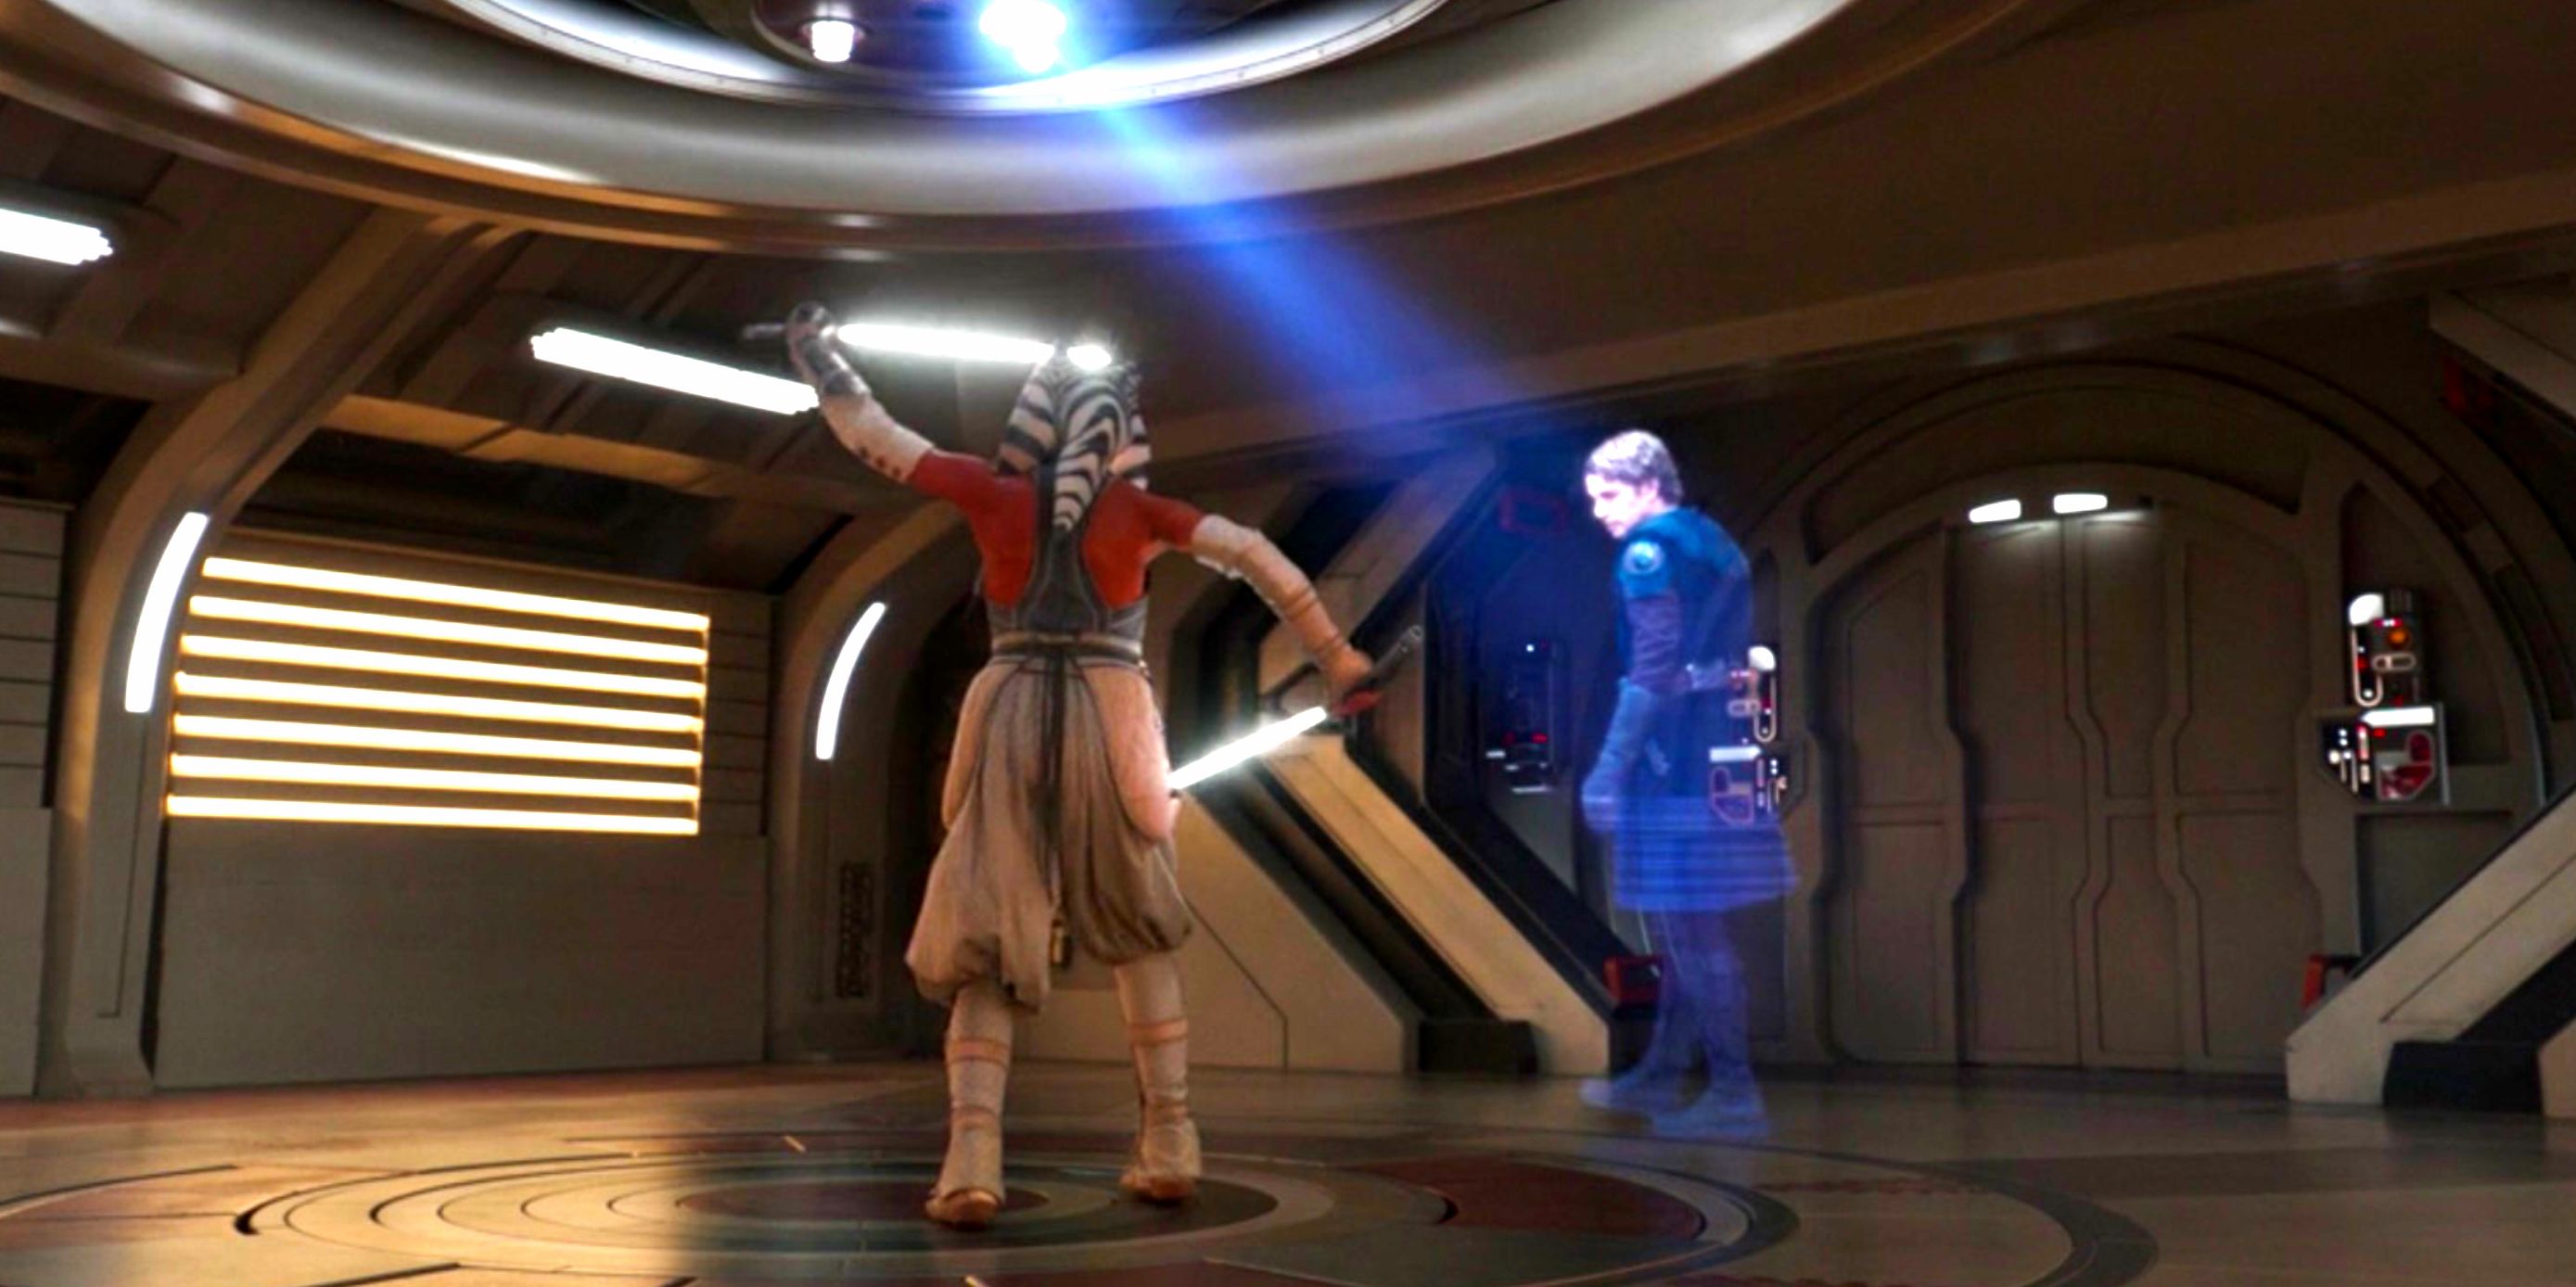 Ahsoka trains with the help of holographic Anakin Skywalker in episode 7.